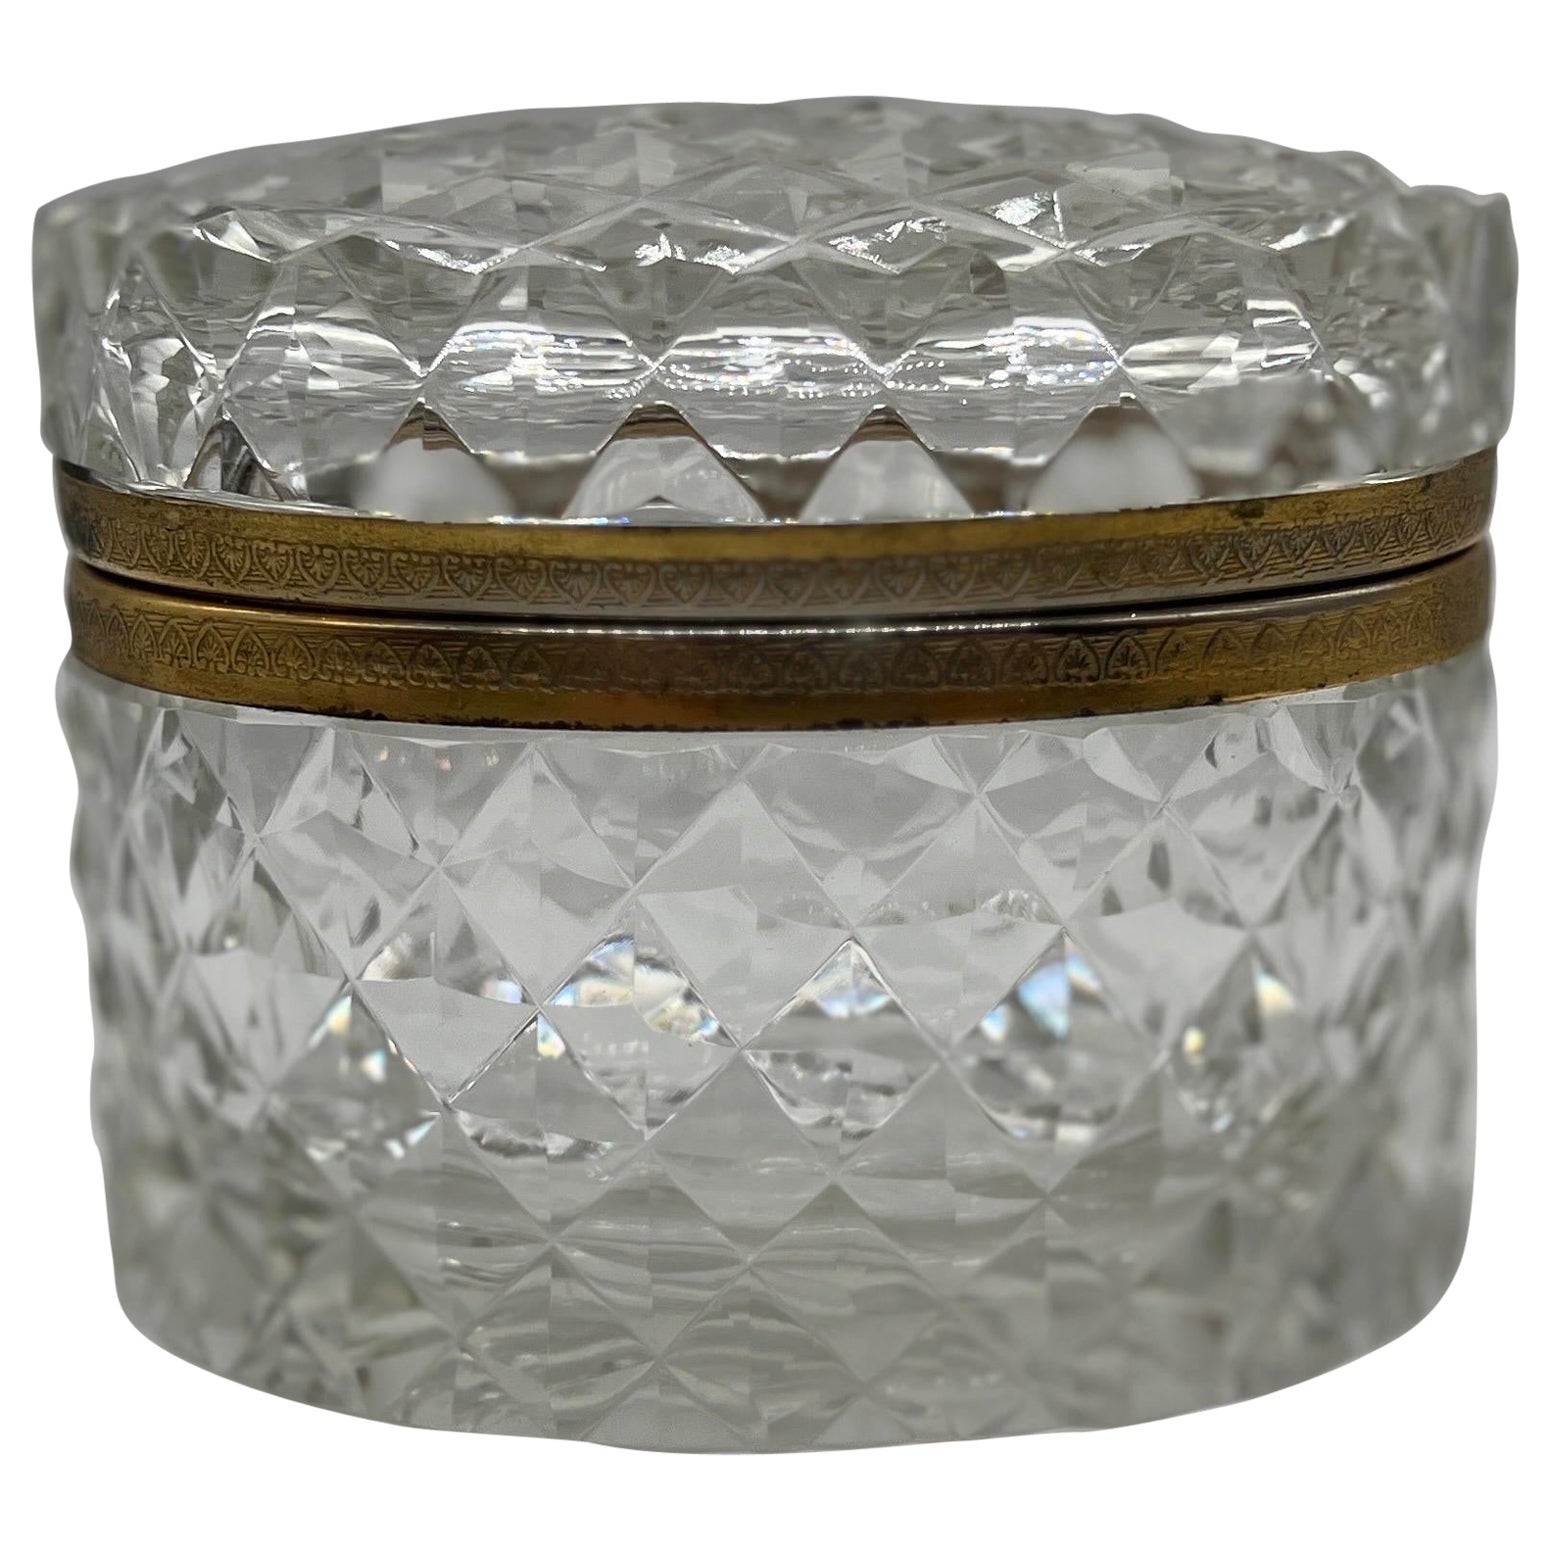 French Baccarat Style Crystal Glass & Ormolu Mounted Oval Casket Box 